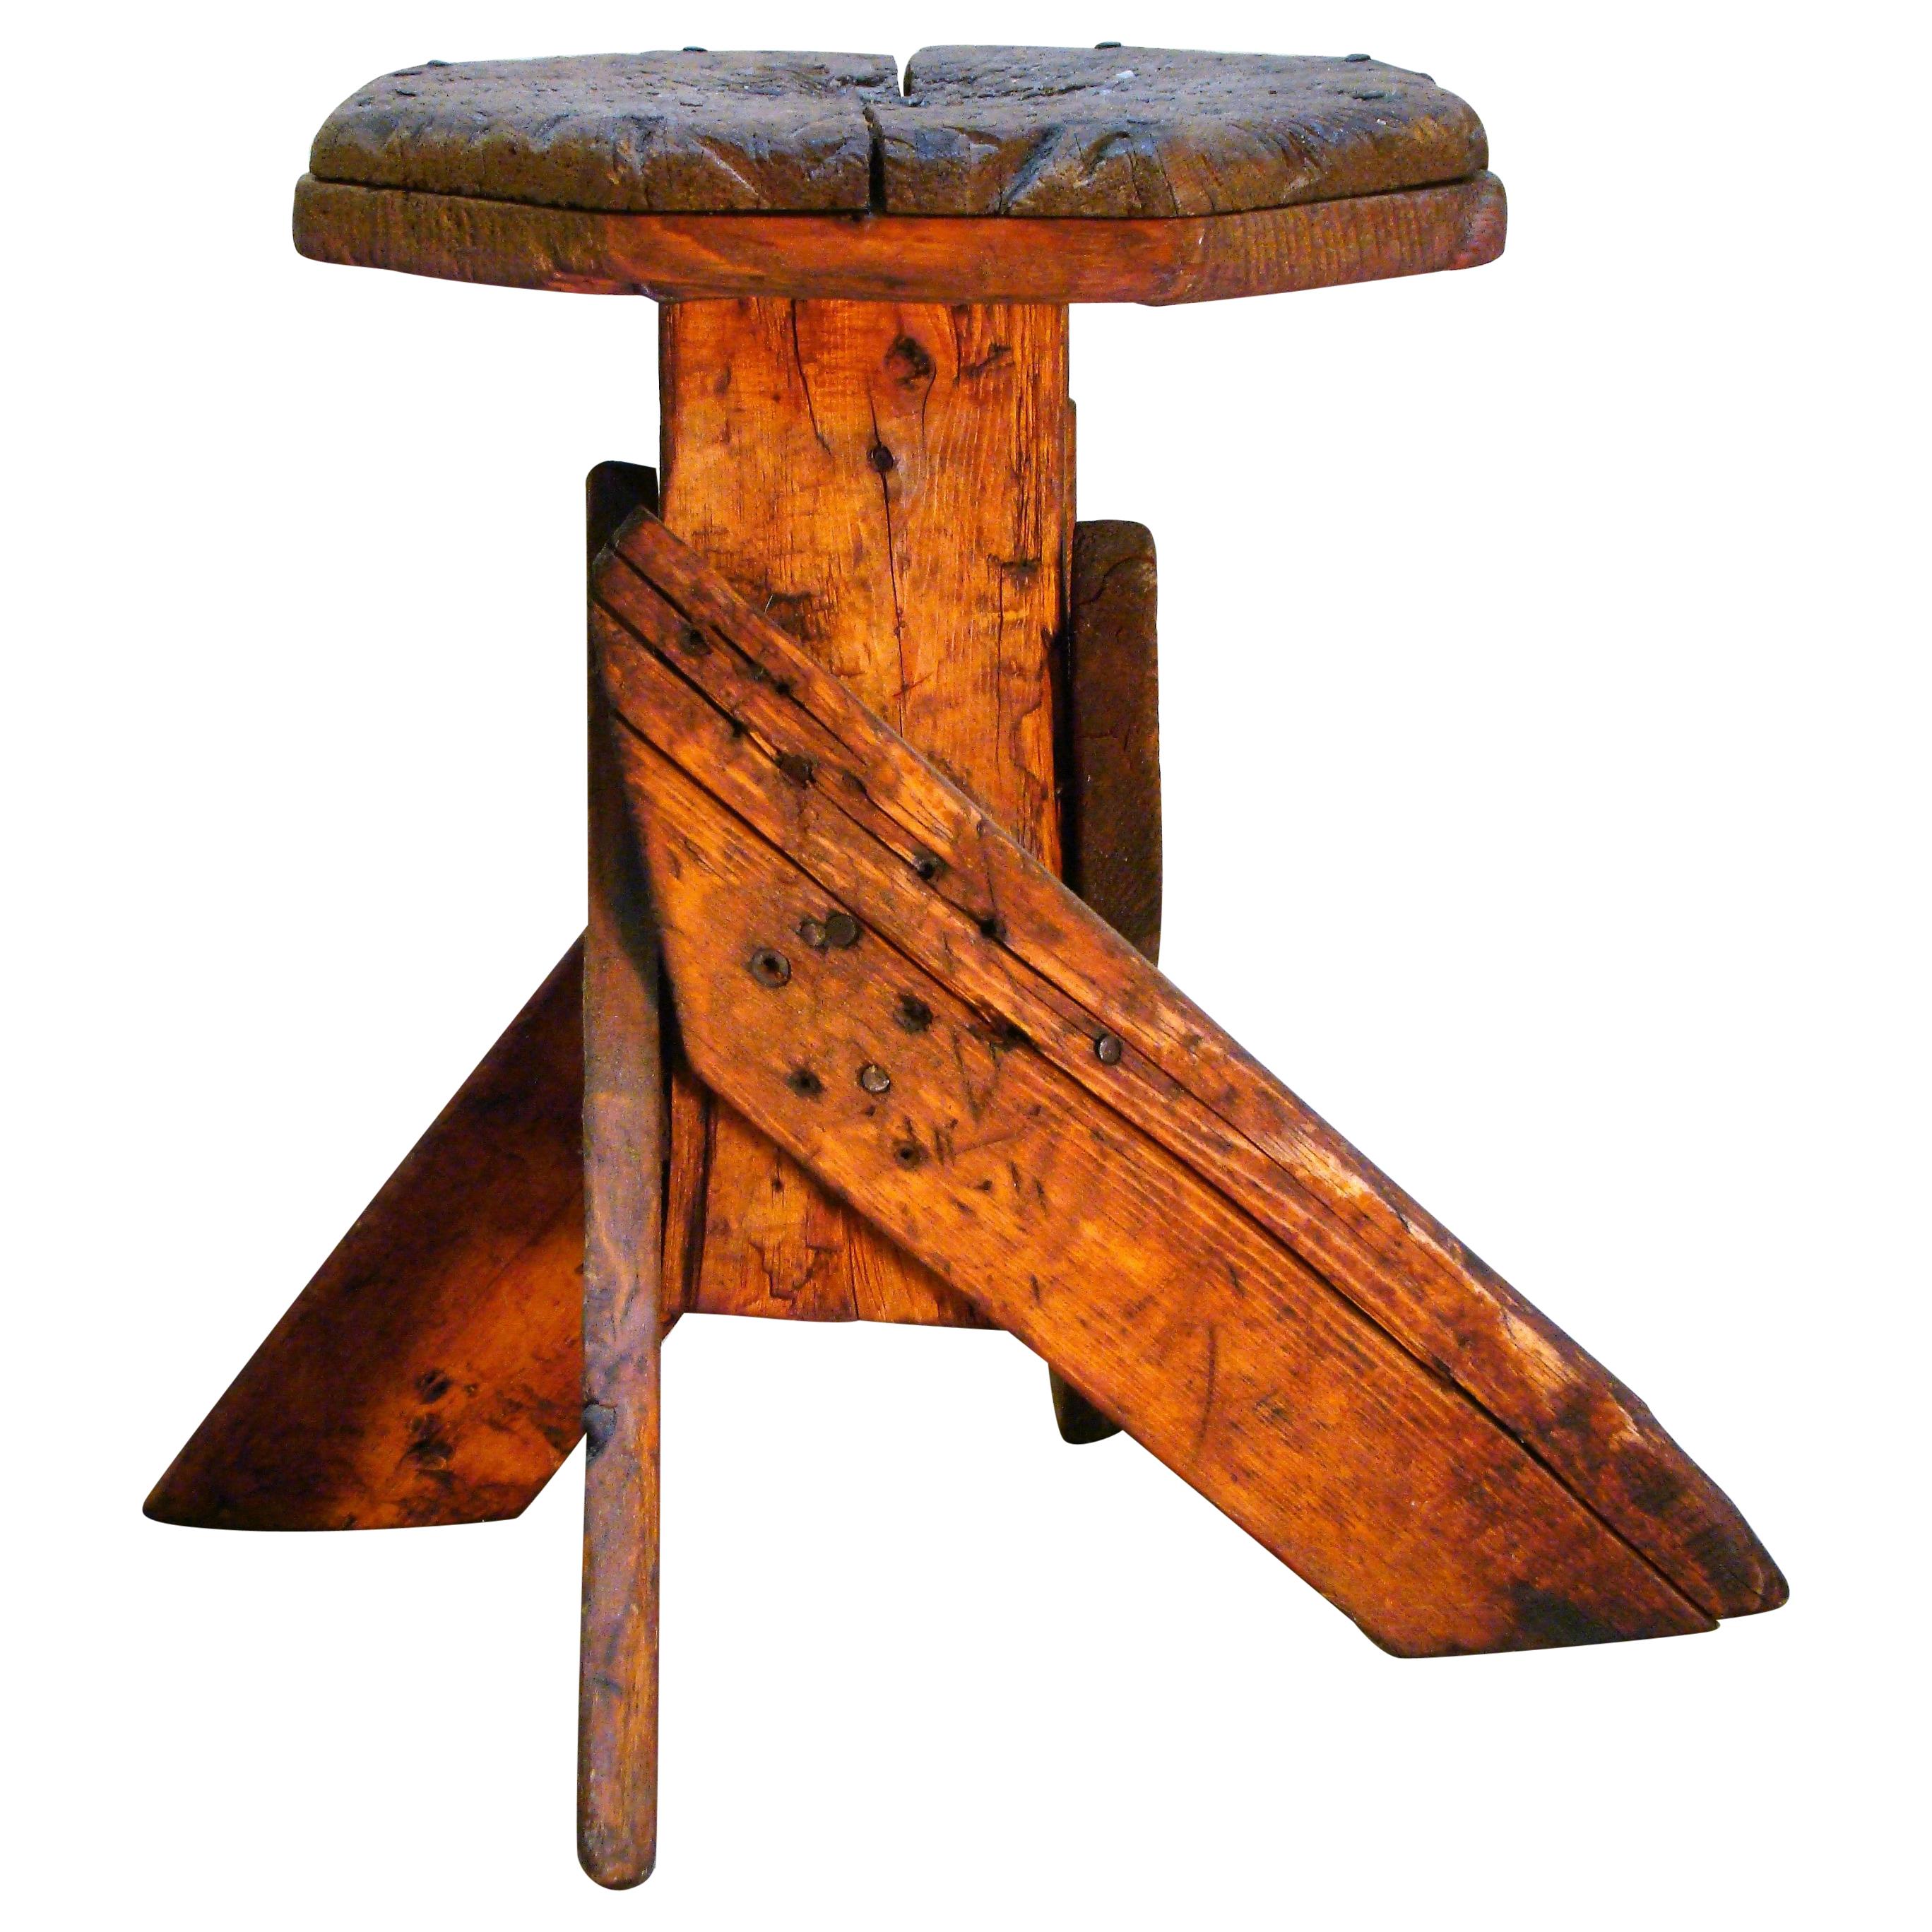 Antique Wooden Milking or Workmans Stool